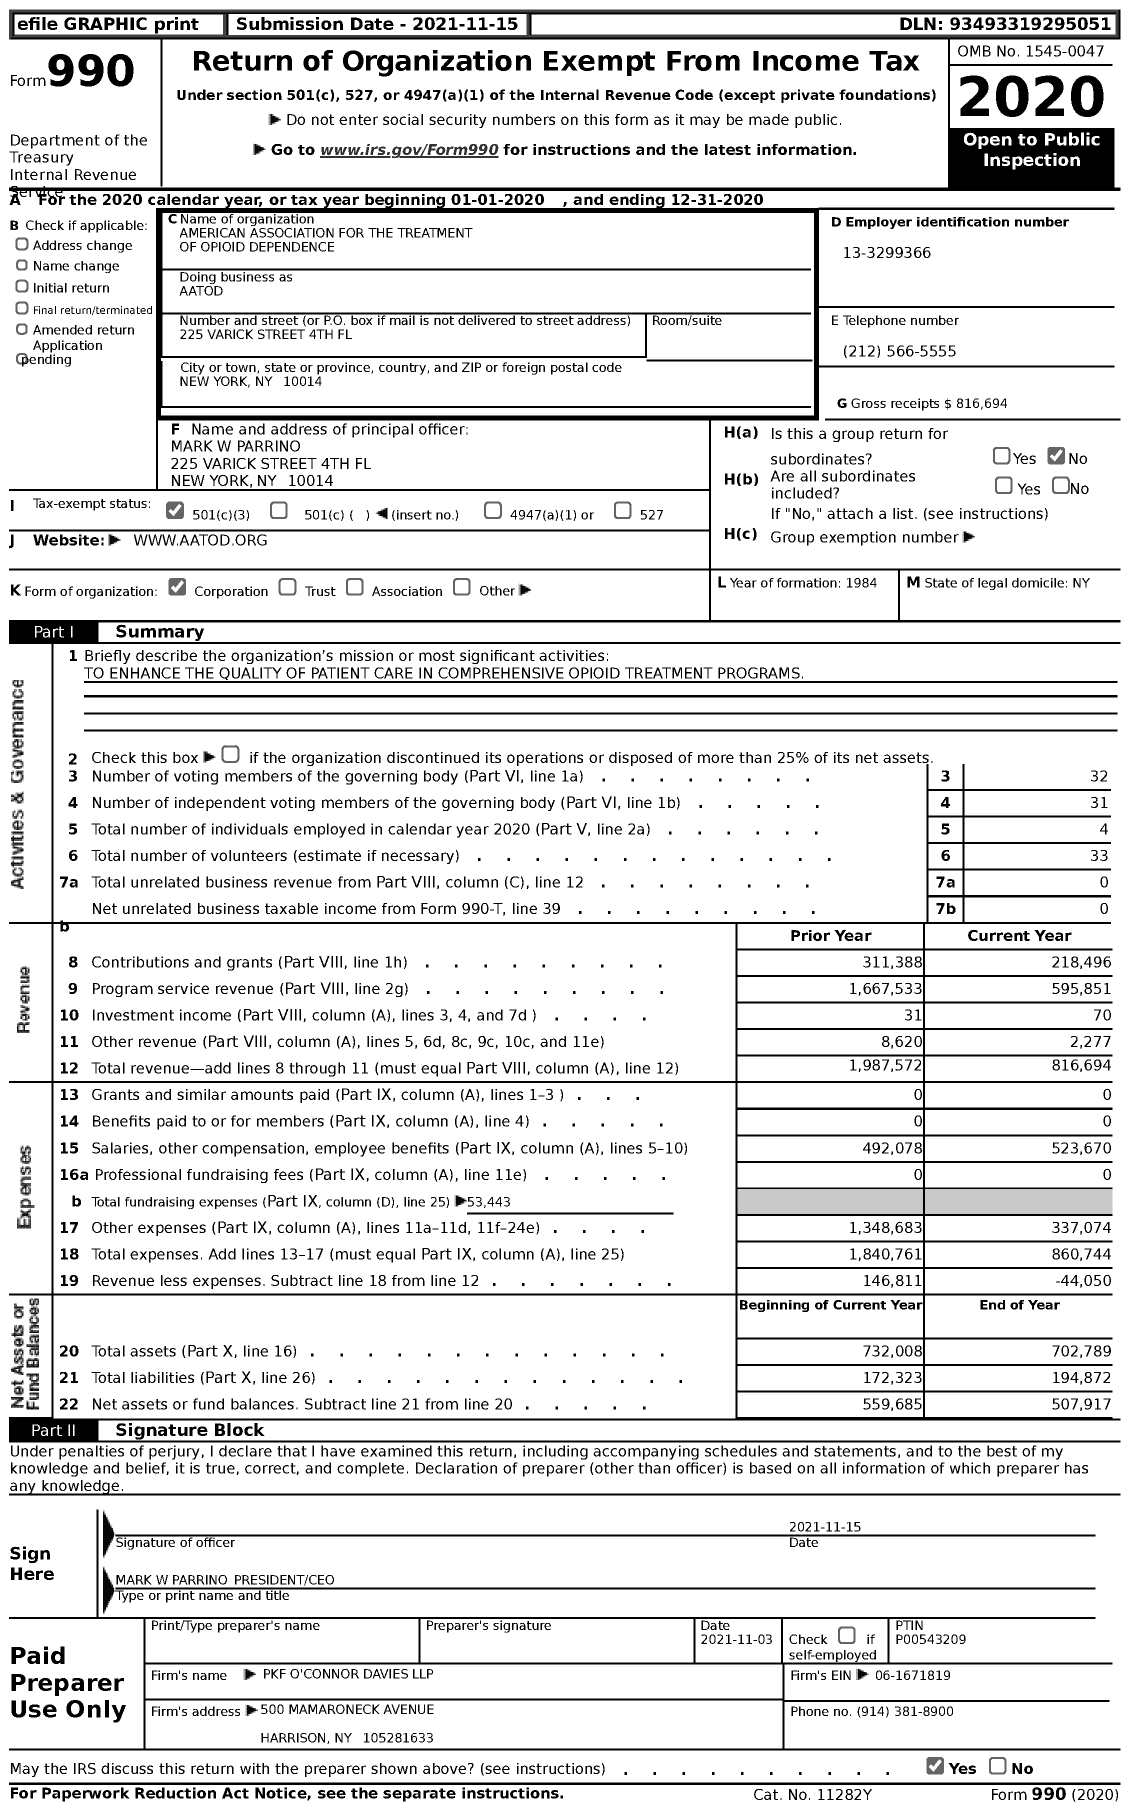 Image of first page of 2020 Form 990 for The American Association for the Treatment of Opioid Dependence (AATOD)